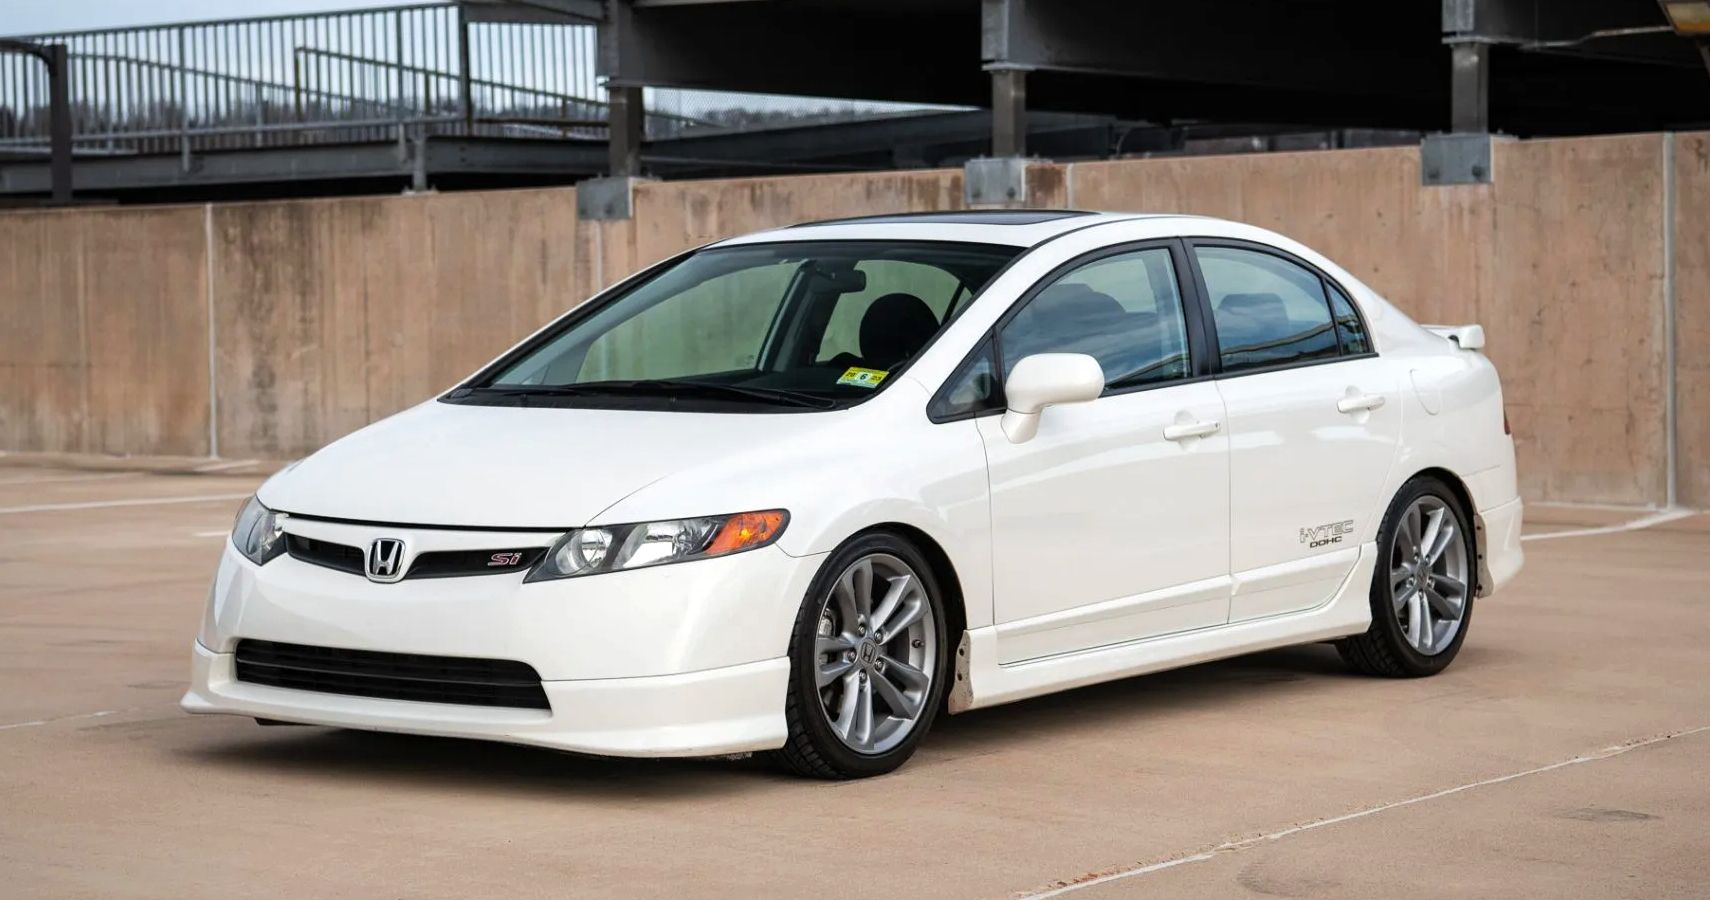 This Is Why The Honda Civic Is One Of The Best-Selling Cars Of All Time